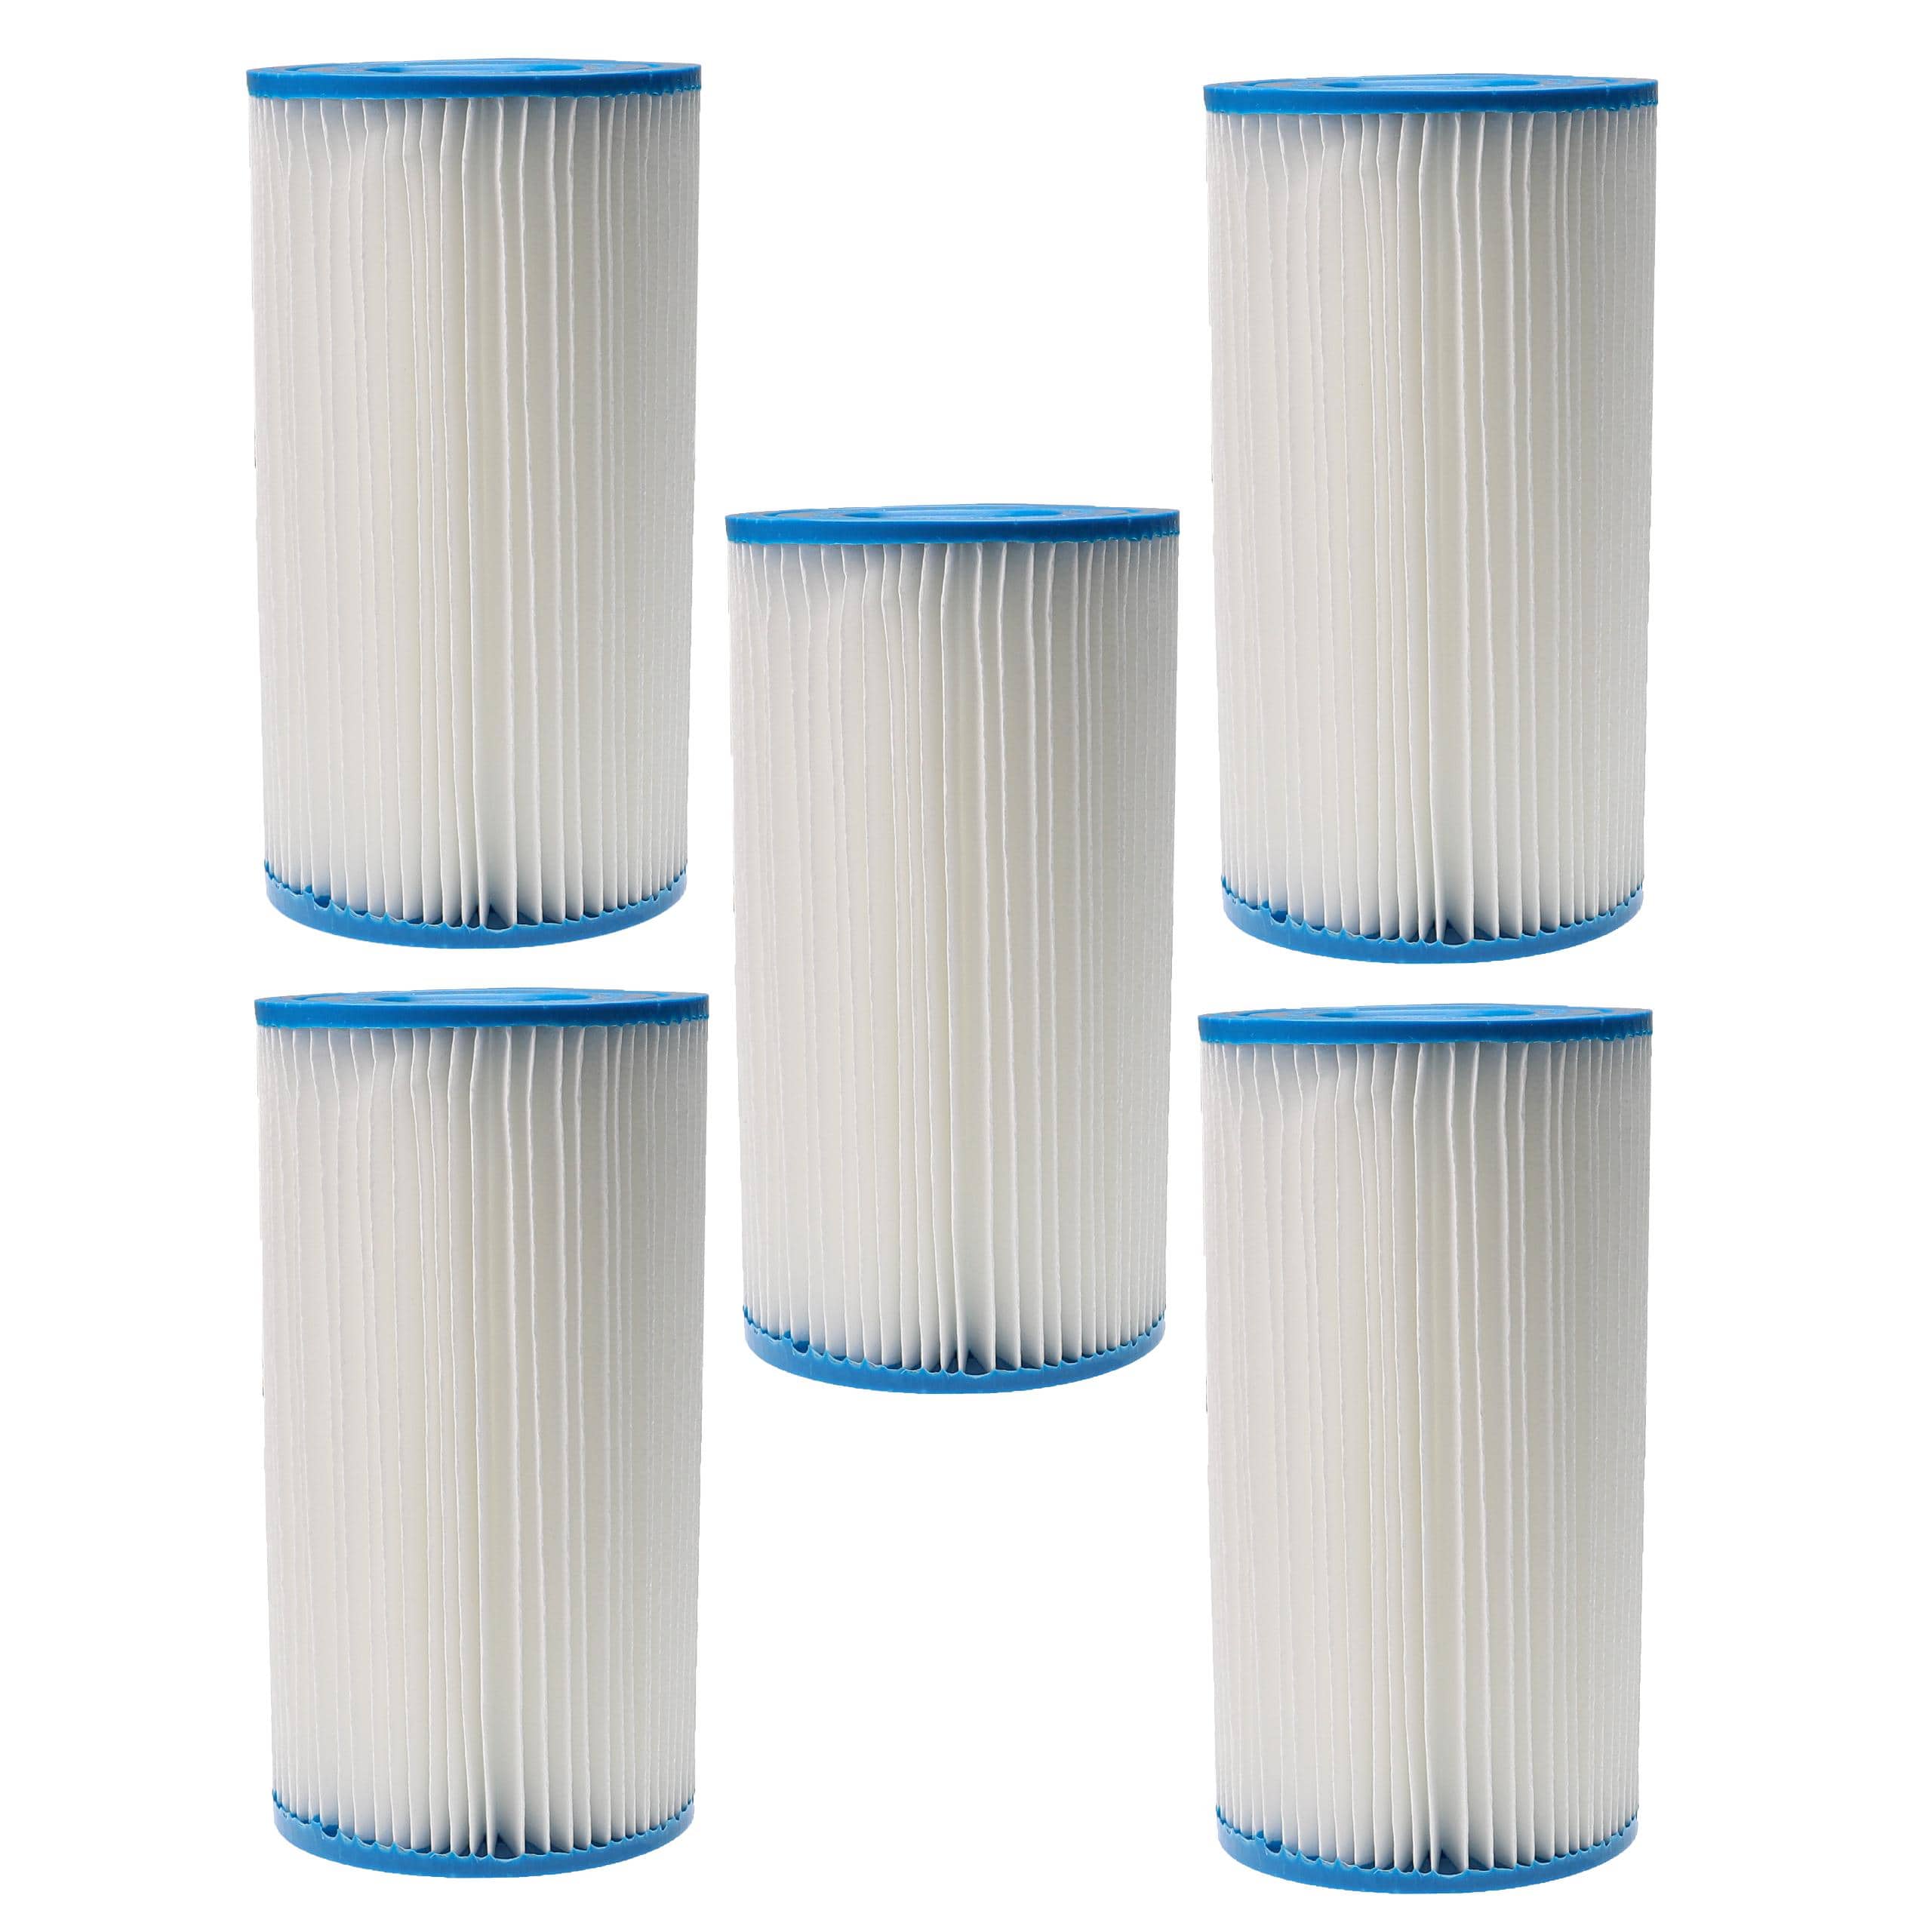  5x Filter Cartridge replaces Intex filter type A for Intex Swimming Pool, Filter Pump - Blue White